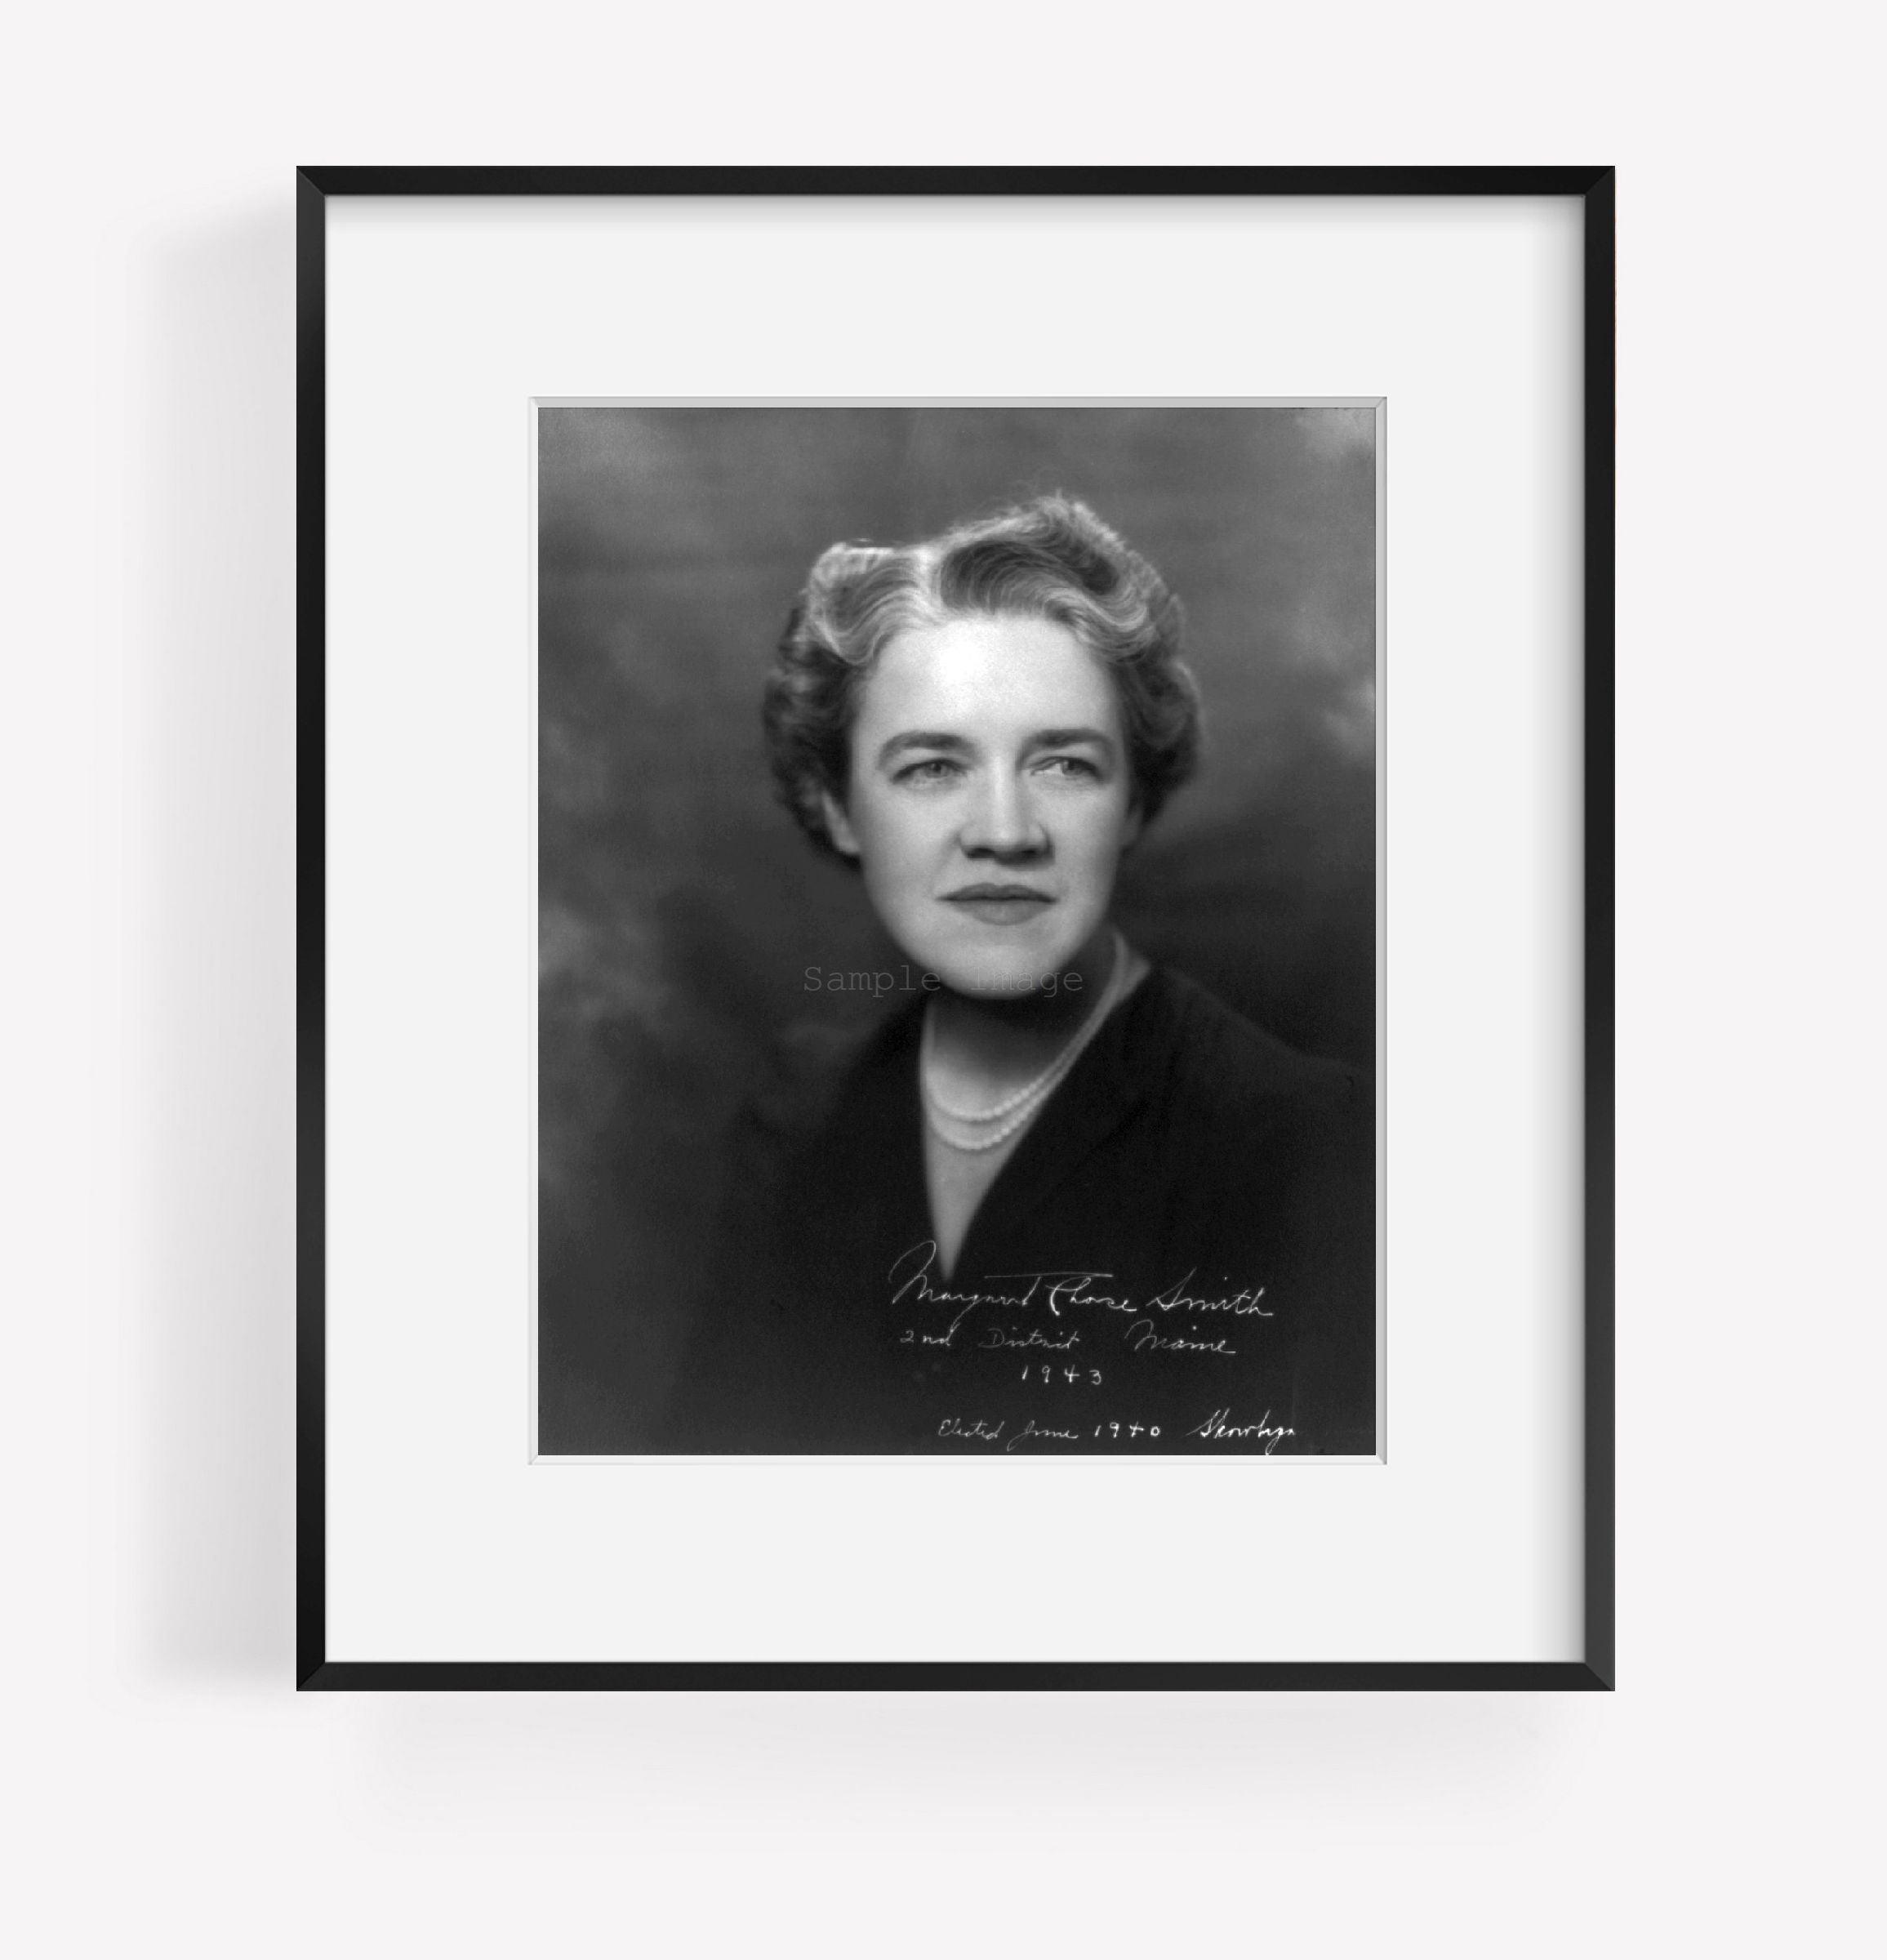 1943 Photo Margaret Chase Smith Portrait, bust, facing right.